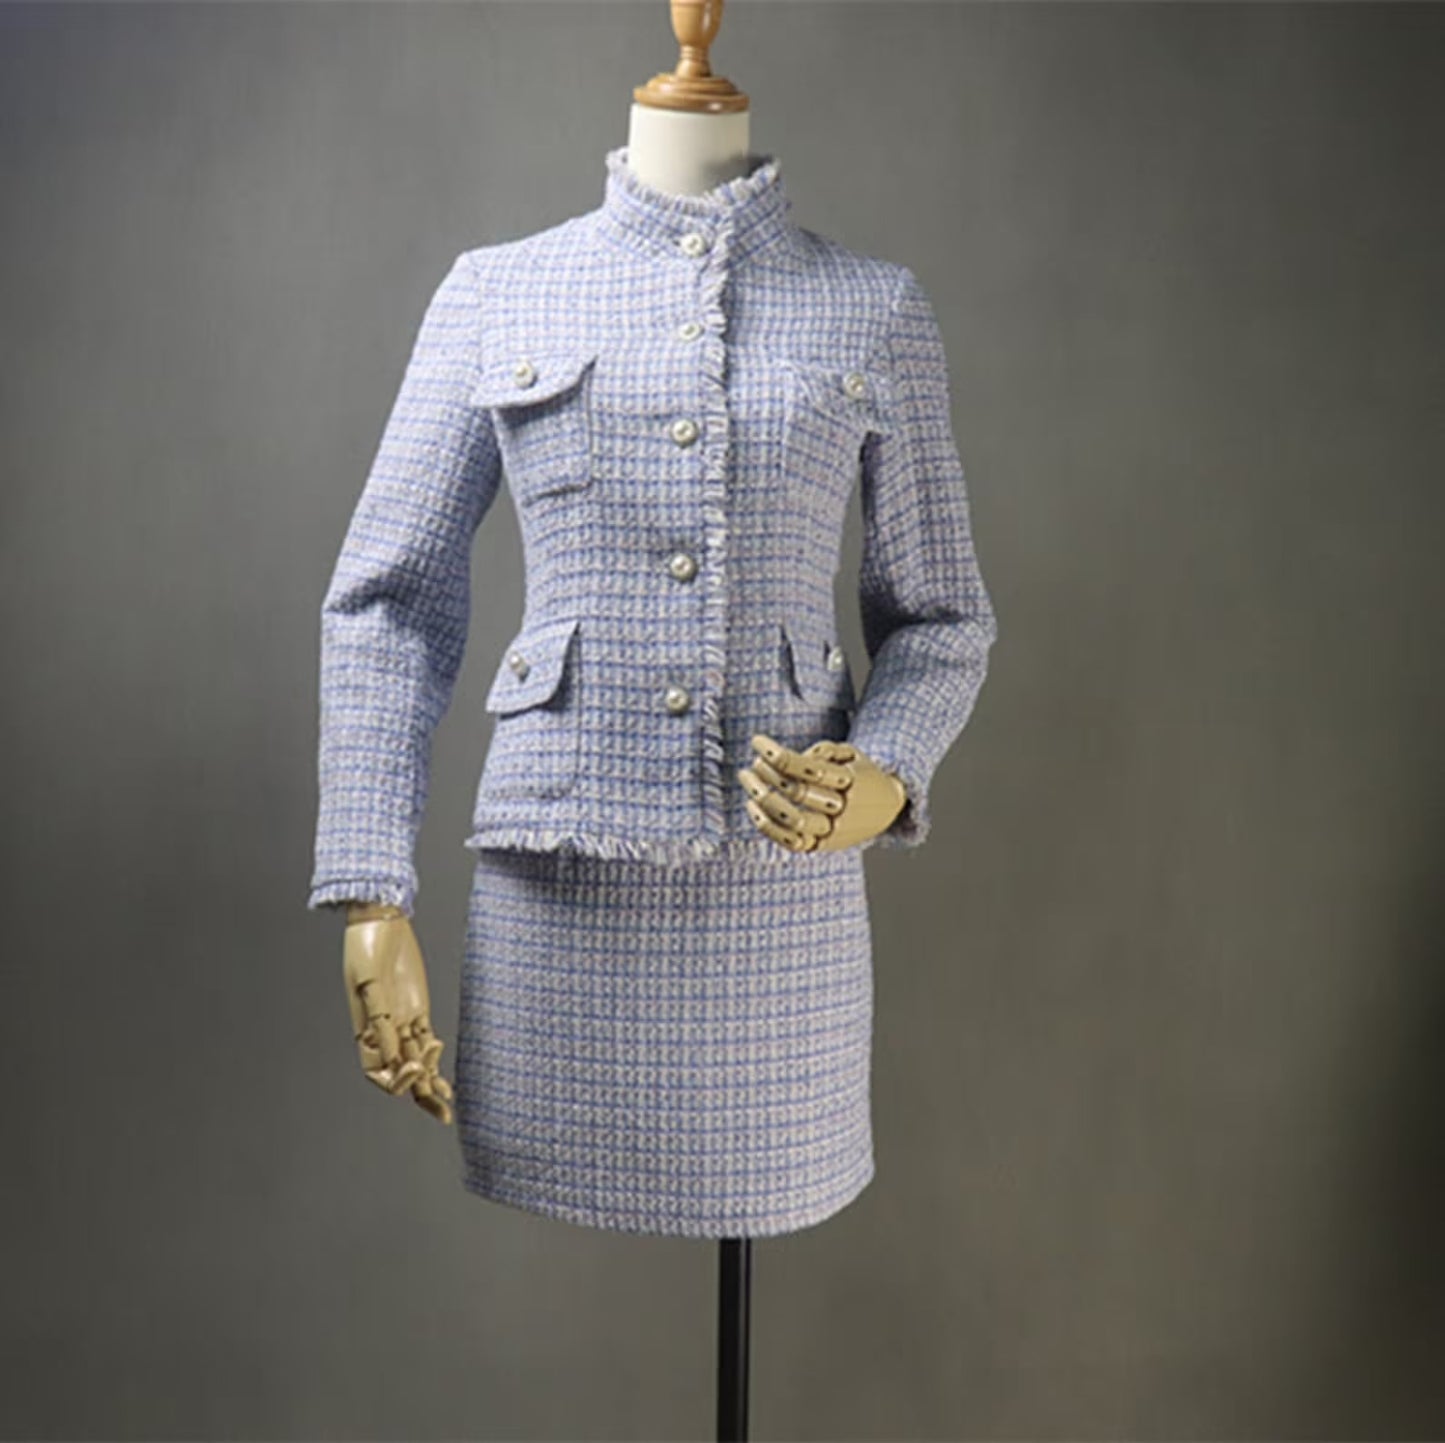 High Neck Pearl Buttons Blue Tweed Suit For Women  UK CUSTOMER SERVICE!   High Neck Pearl Buttons Blue Tweed Suit For Women -   Our tailor will make as per customer requirement like with pocket, sleeveless, without pocket etc. Suit is design with tweed fabric, its unique style and can worn for party, night out, ceremony , inauguration and Functions. Designed with High neck and Pearl Buttons.